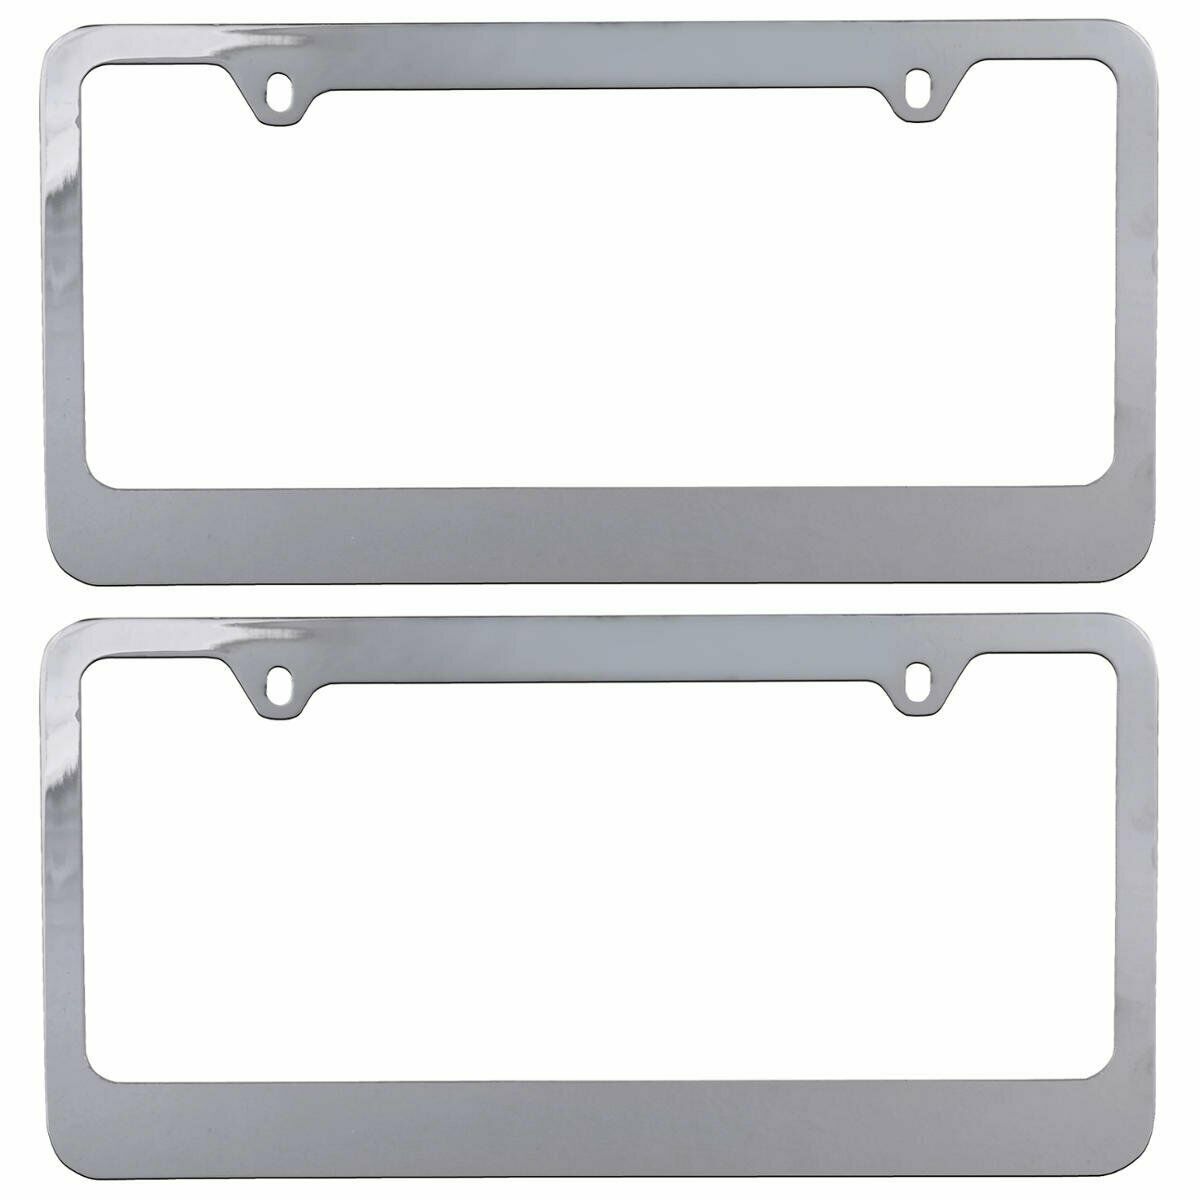 Chrome Plated Rust-Proof Die-Cast Stainless Metal License Plate Frame/Holder Universal Size - Blank Metal Design (Pack of 2) - 2-Pack